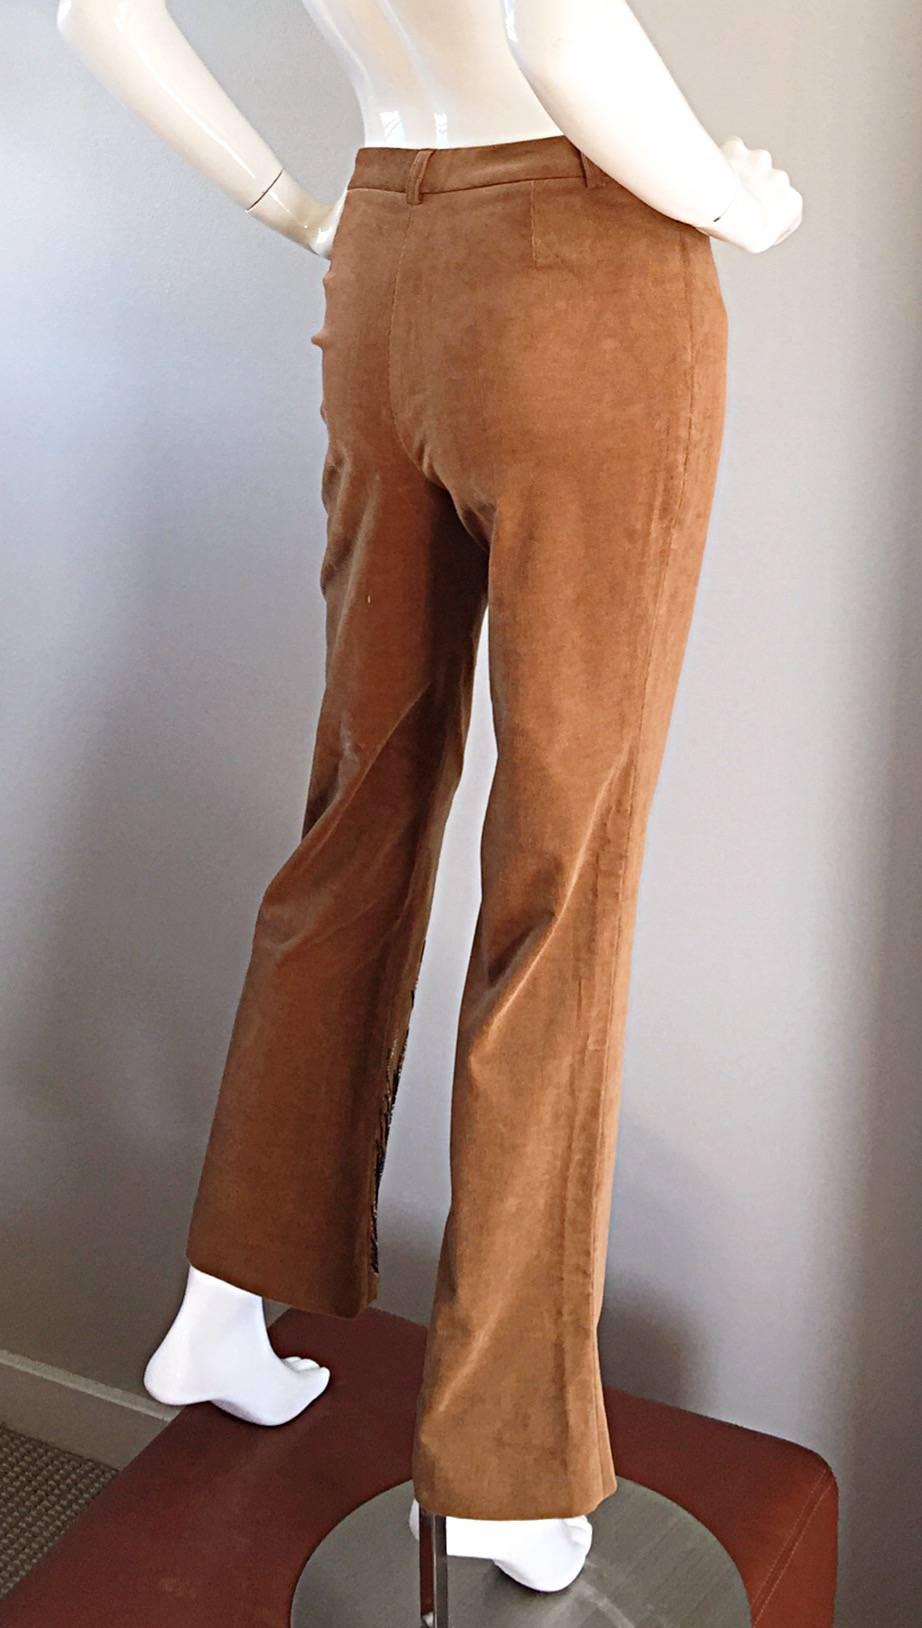 Incredible vintage late 90s / early Y2K Patrick Mendes (MADE IN FRANCE) flared leg trousers! Rich tan cotton corduroy, with intricate hand-beading at left leg, that forms a peacock feather. Expertly tailored, with an awesome flared leg, that looks